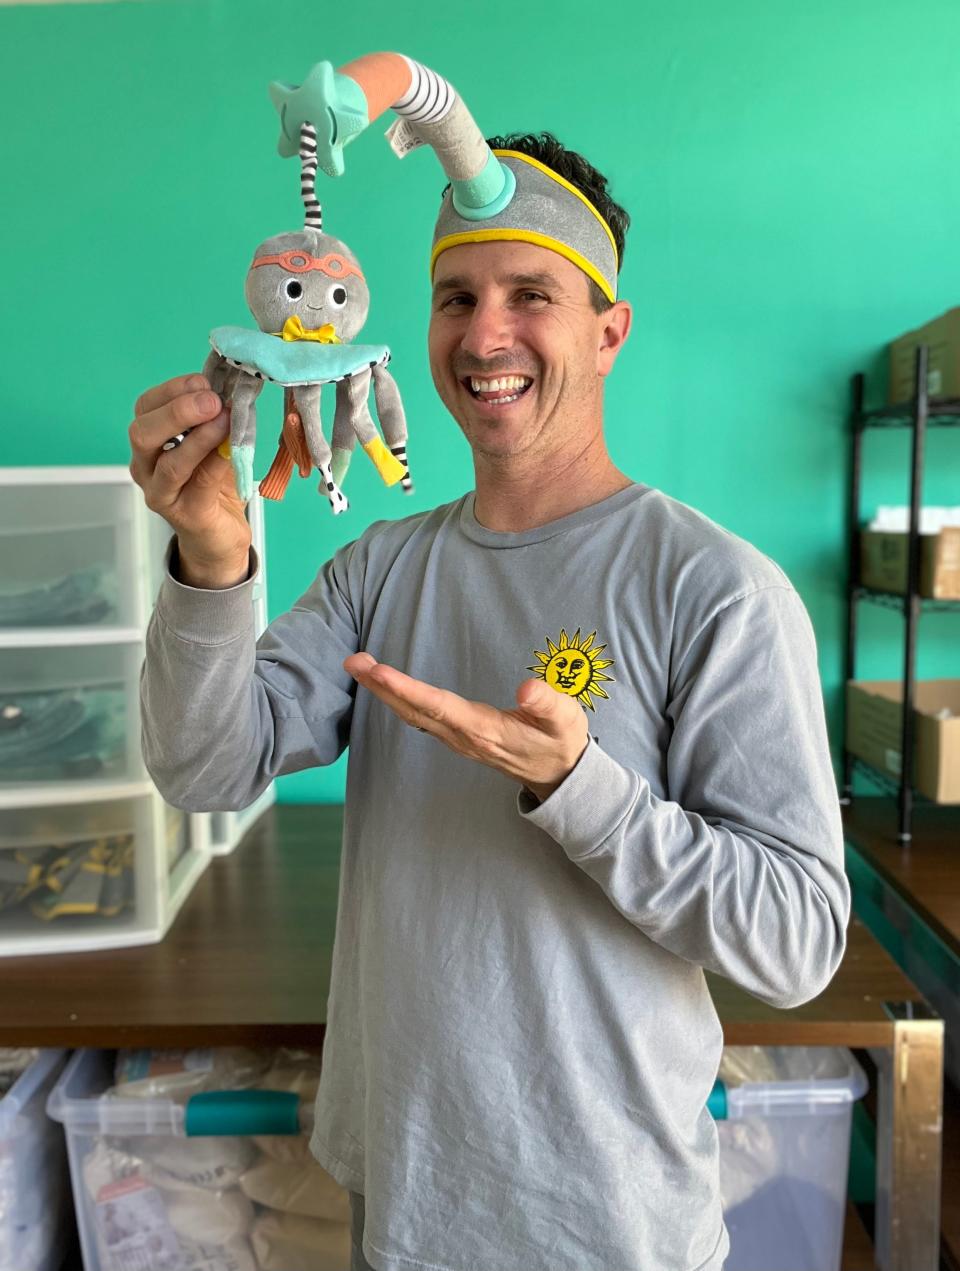 Stewart Gold, co-founder of Dingle Dangle, poses with the innovative, multi-use interaction and distraction baby product he helped design.